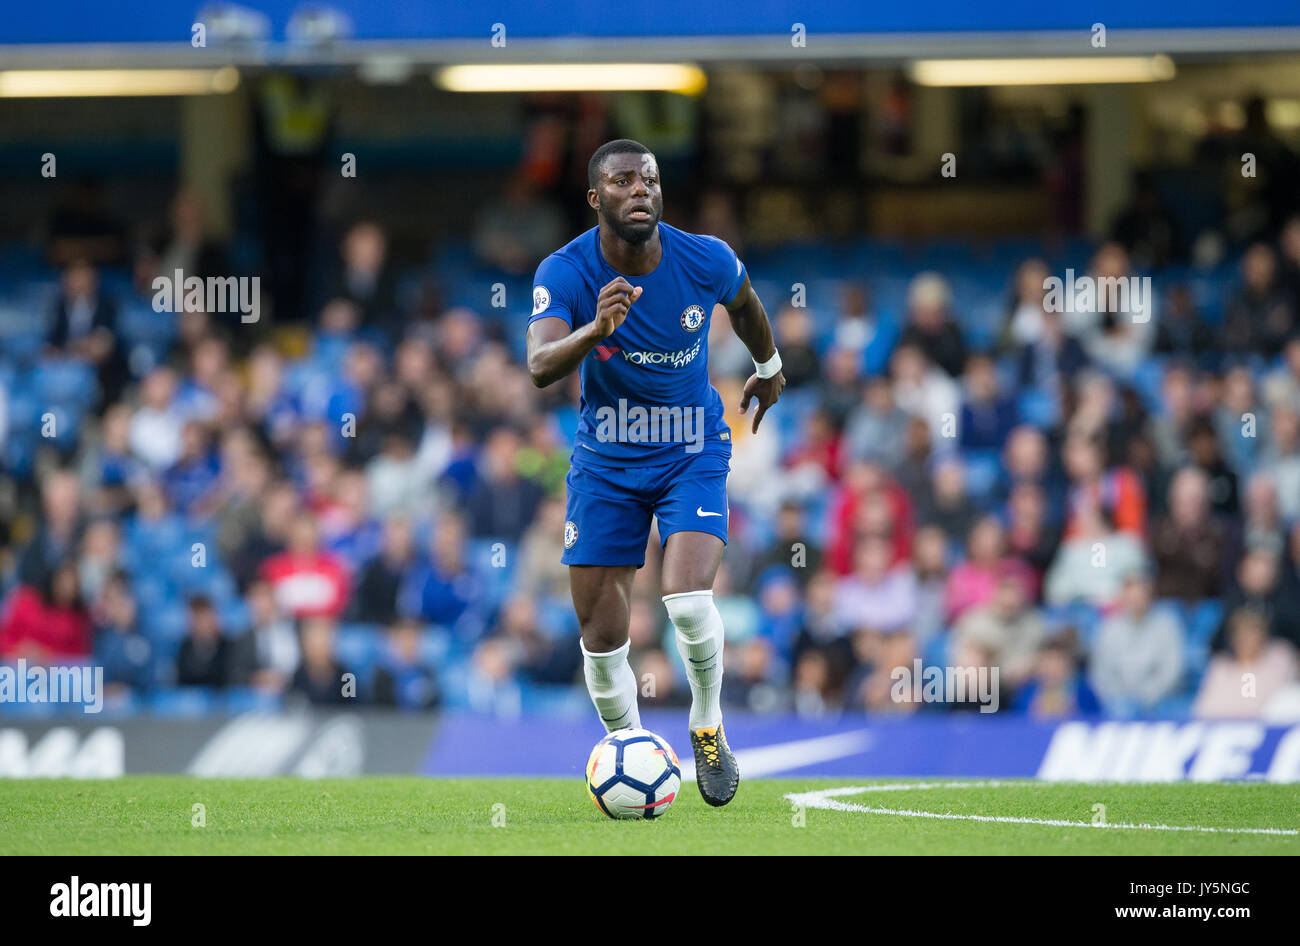 London, UK. 18th Aug, 2017.  London, UK. 18th Aug, 2017. Joseph COLLEY of Chelsea in action during the U23 Premier League 2 match between Chelsea and Derby County at Stamford Bridge, London, England on 18 August 2017. Photo by Andy Rowland. **EDITORIAL USE ONLY FA Premier League and Football League are subject to DataCo Licence. Credit: Andrew Rowland/Alamy Live News Credit: Andrew Rowland/Alamy Live News Stock Photo